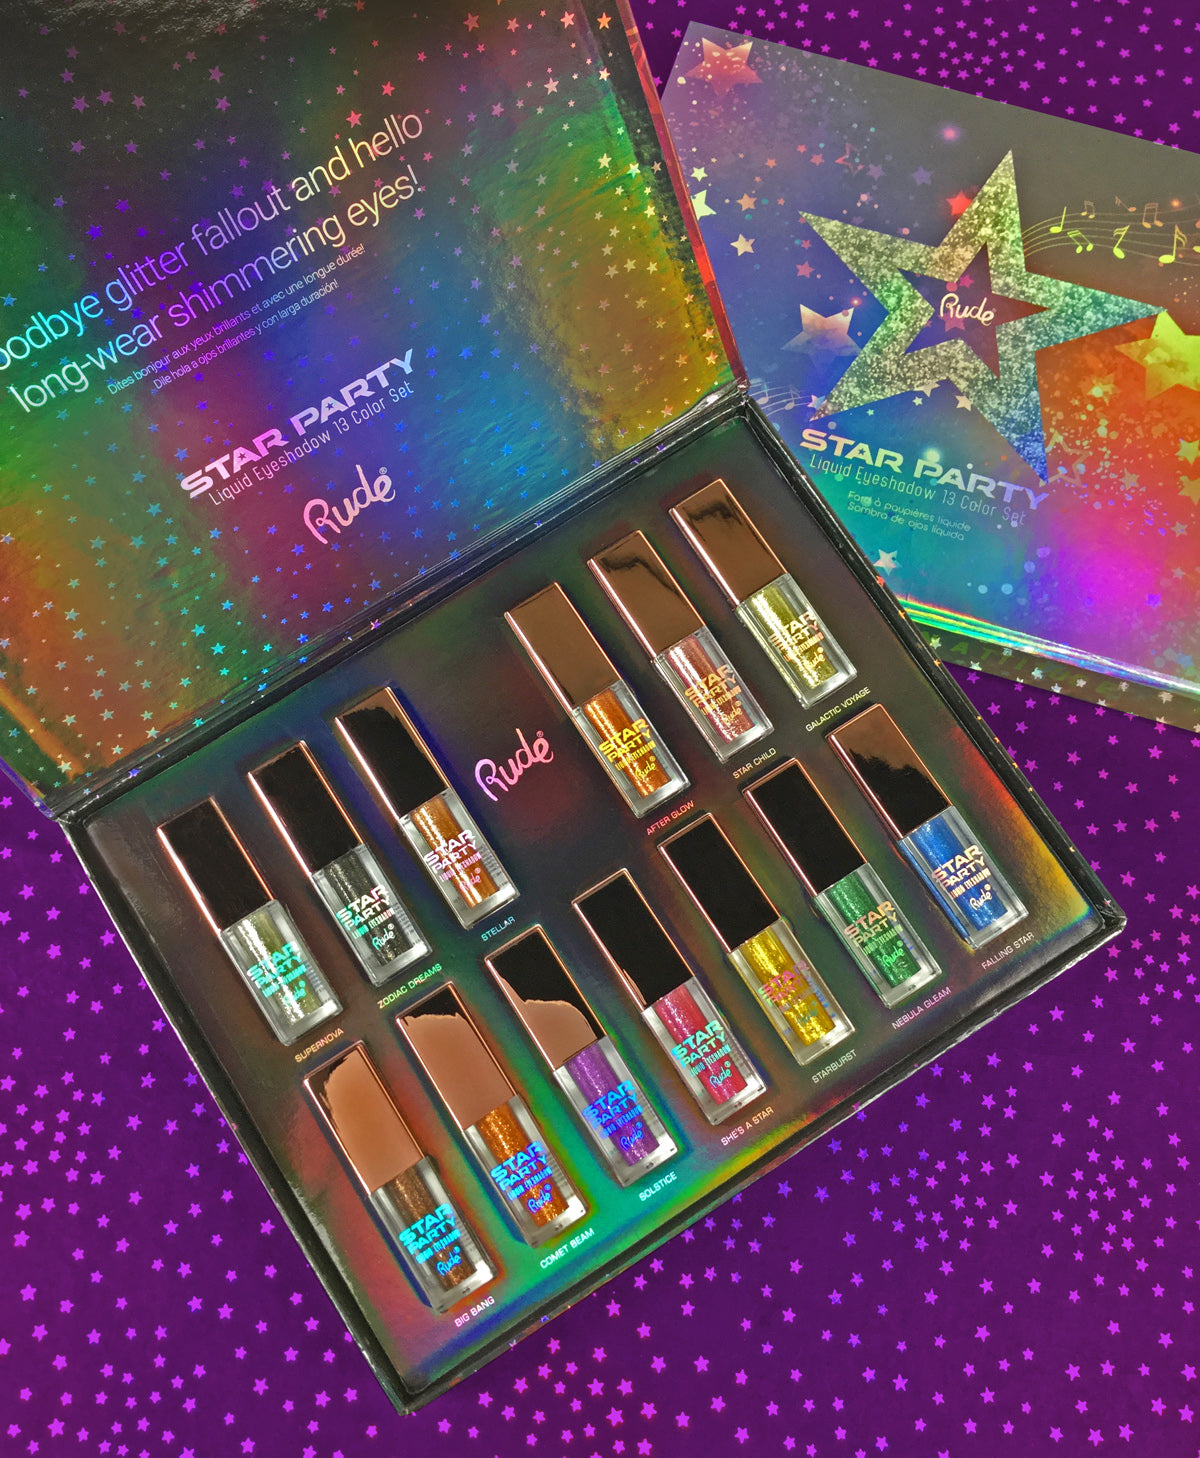 Star Party Liquid Eyeshadow Complete Set (SPECIAL DEAL) Lifestyle